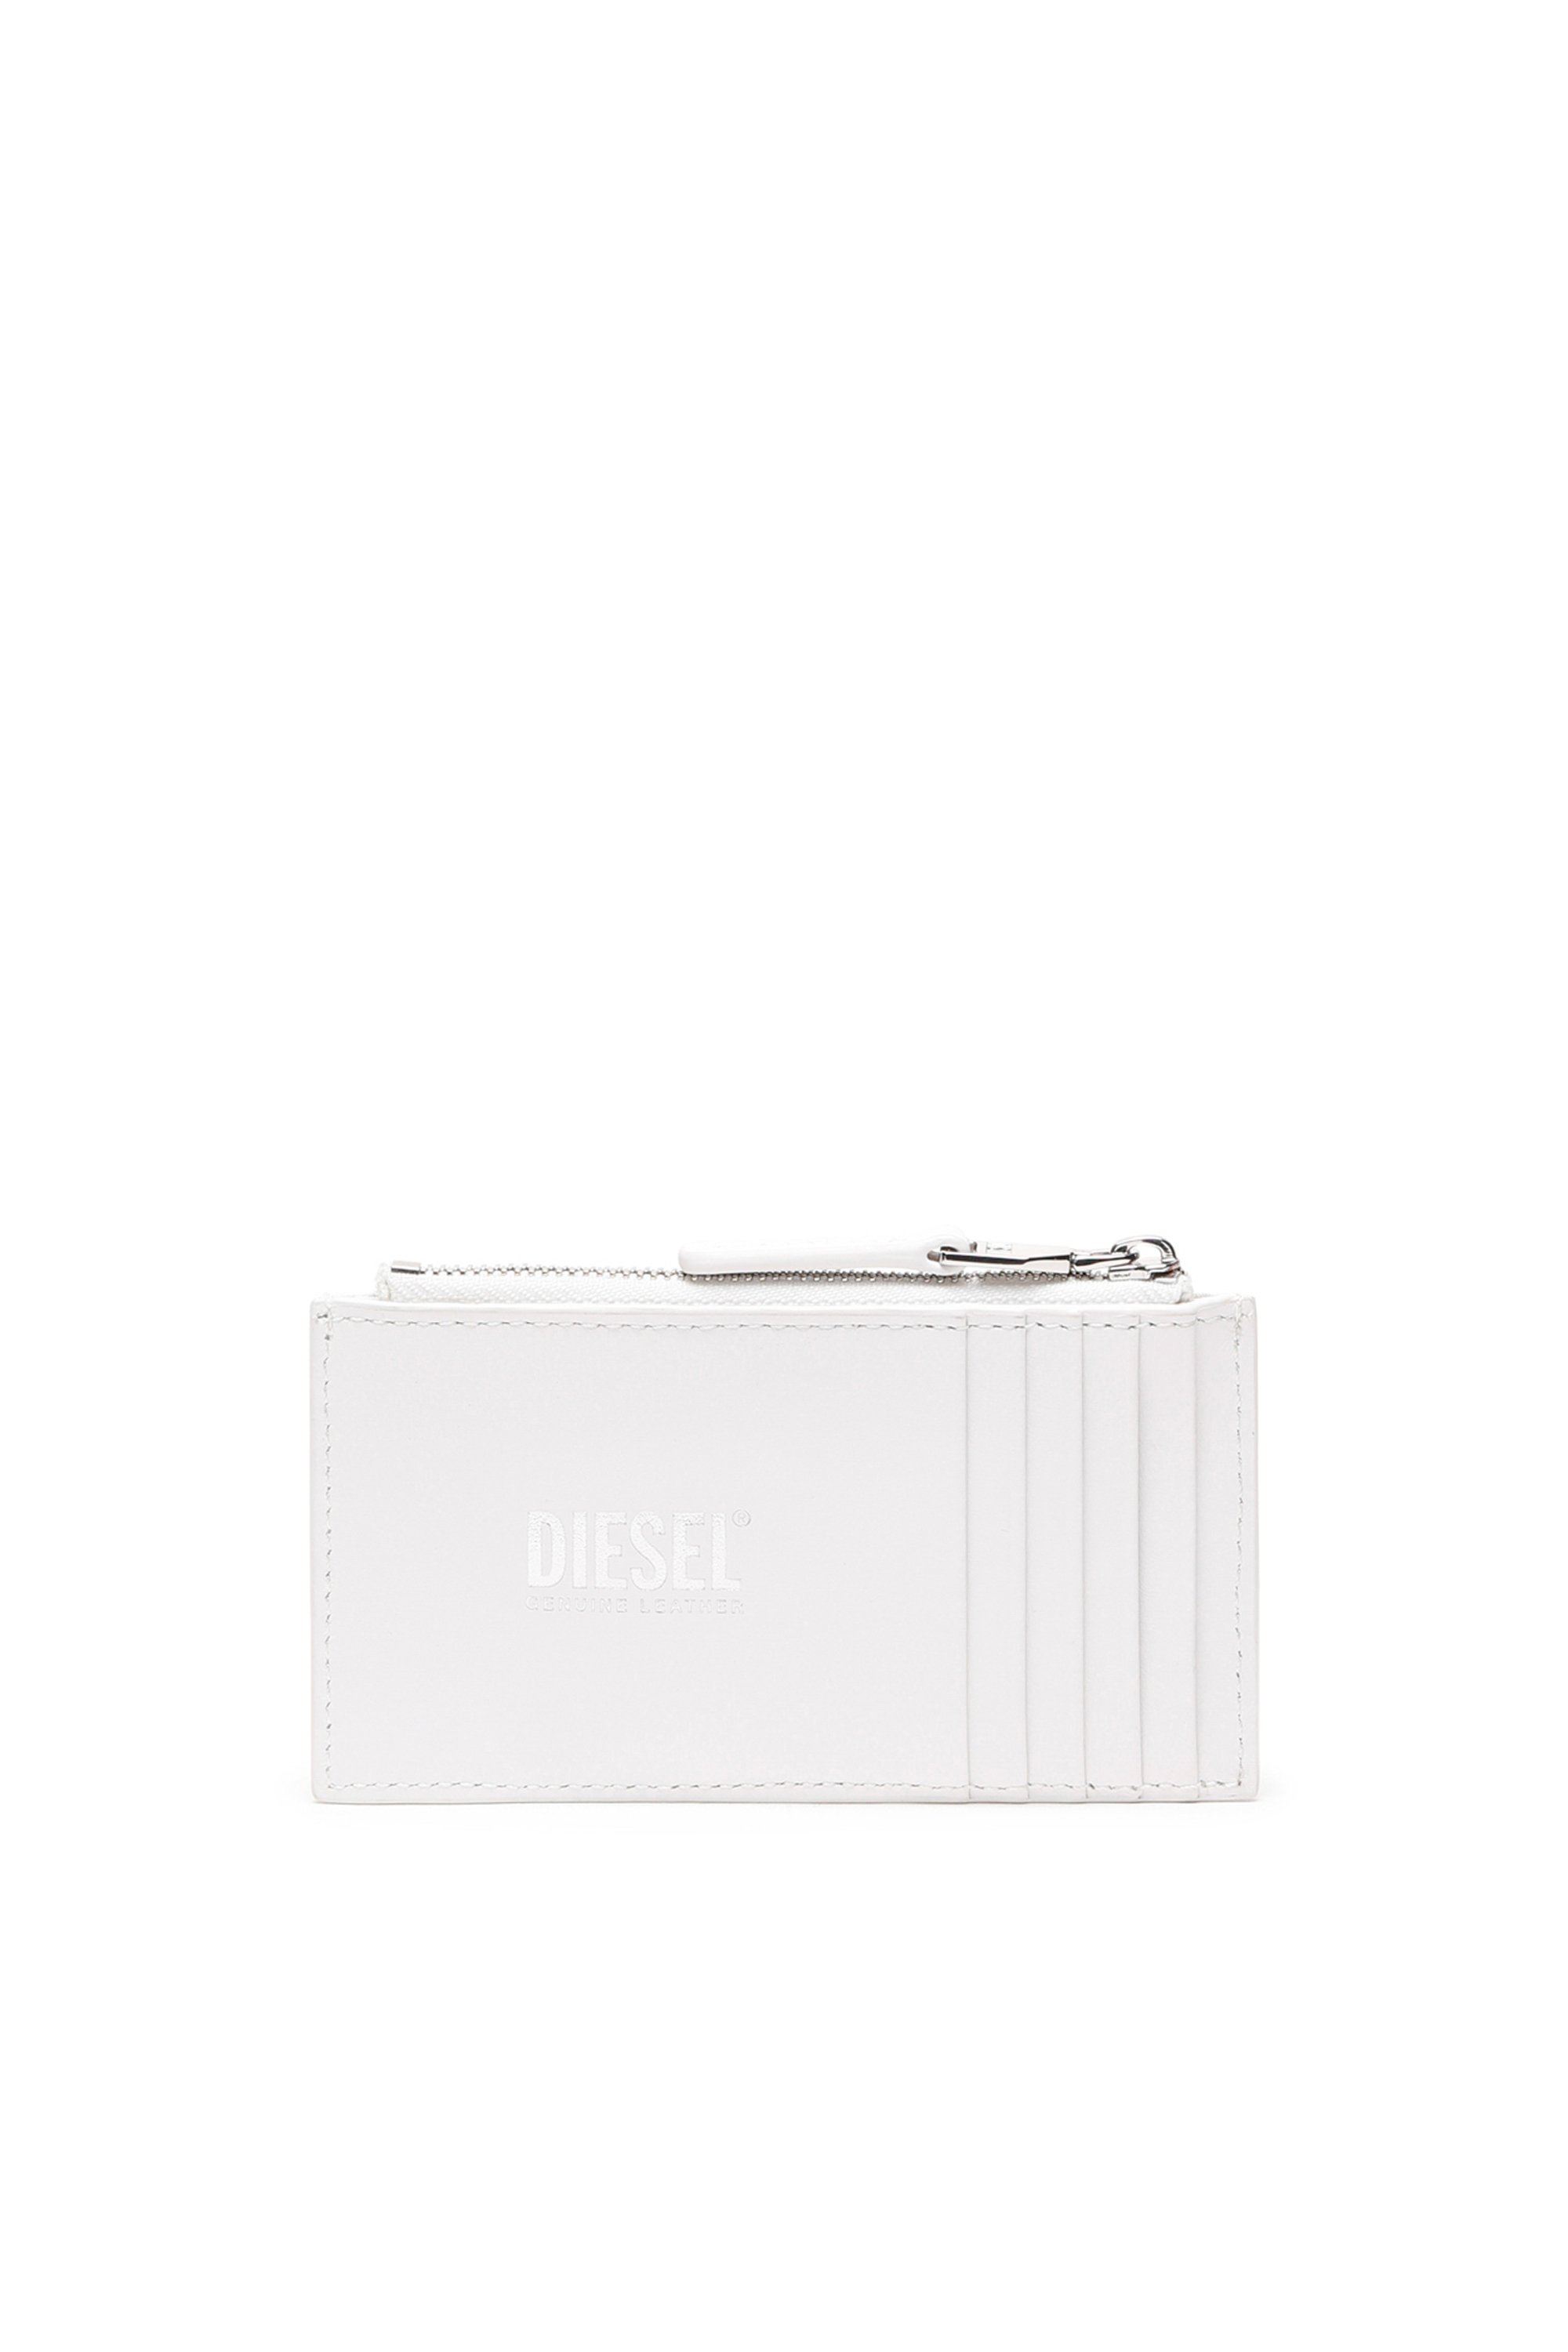 Diesel - PAOULINA, Bianco - Image 2